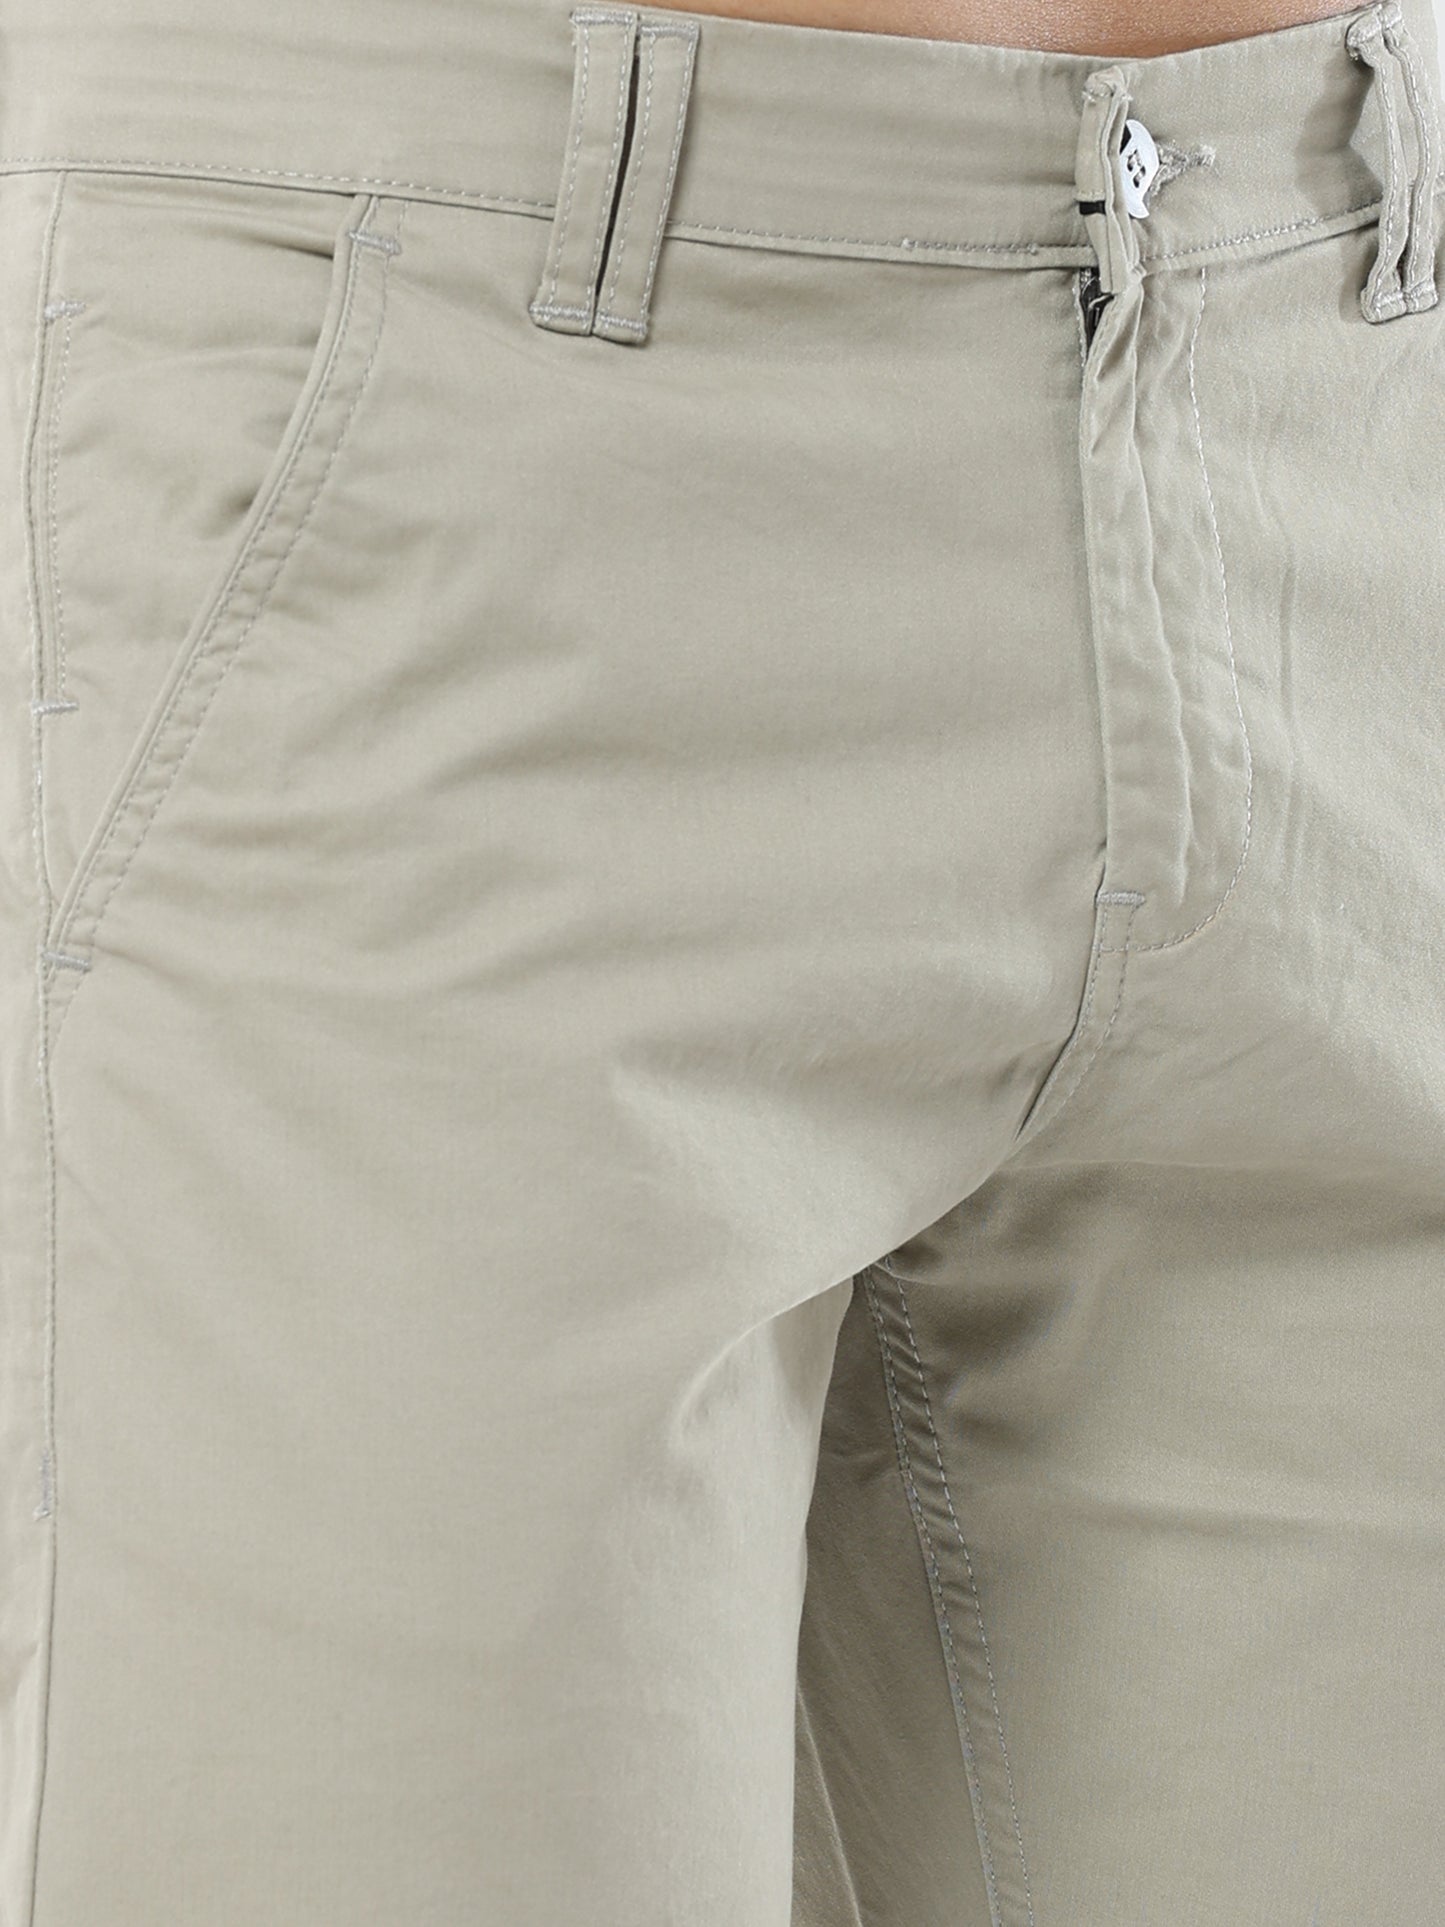 Albatross Plain classic Trout Gray chinos for mens